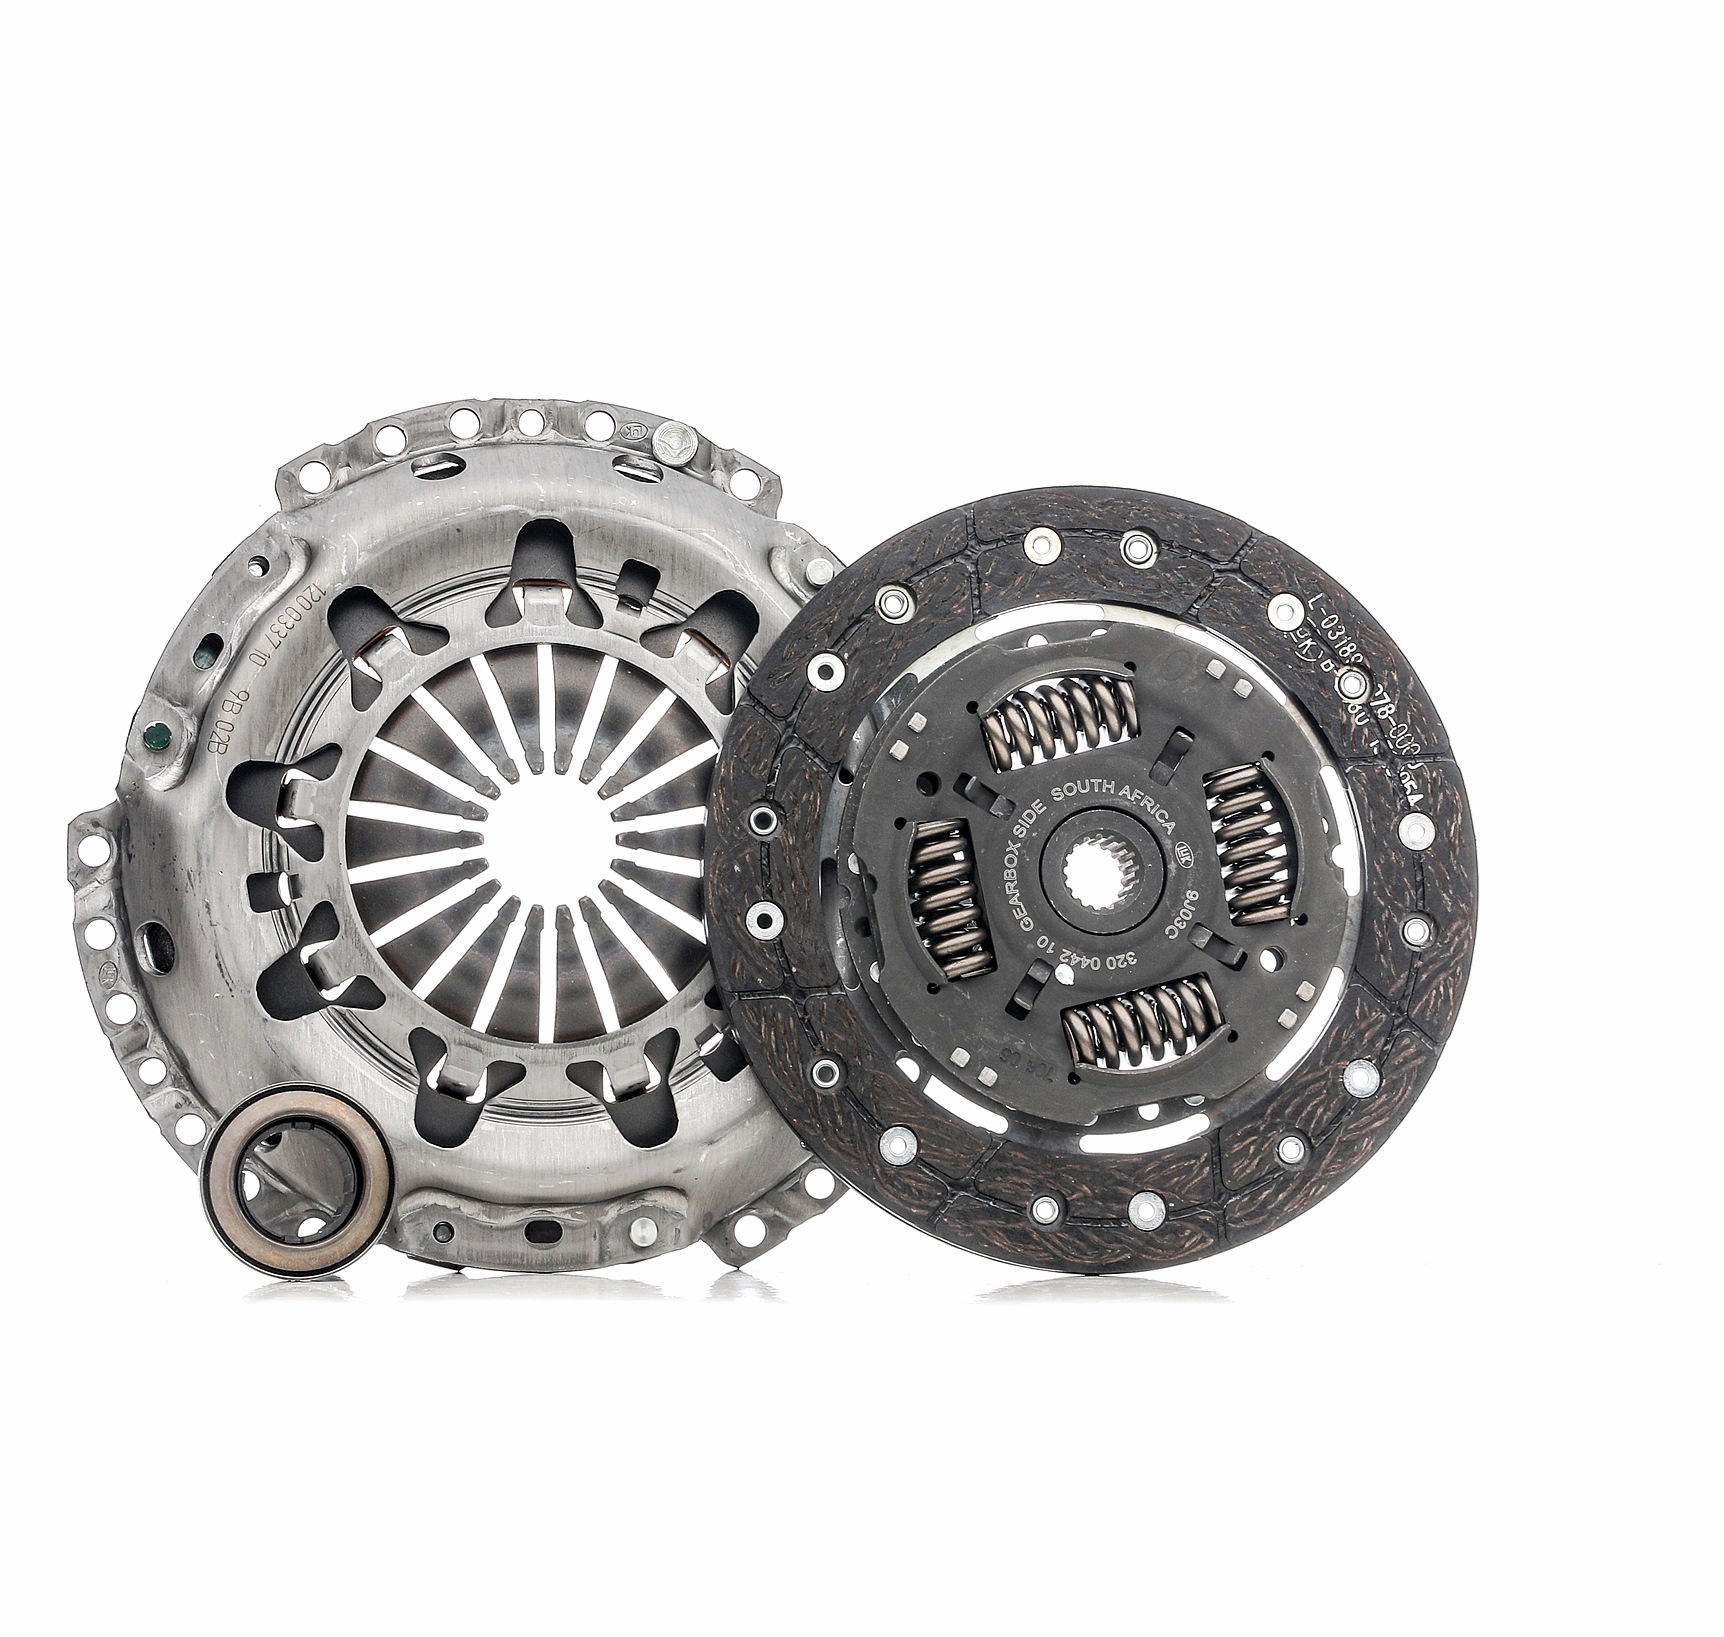 LuK 620 3237 00 Clutch kit MINI experience and price